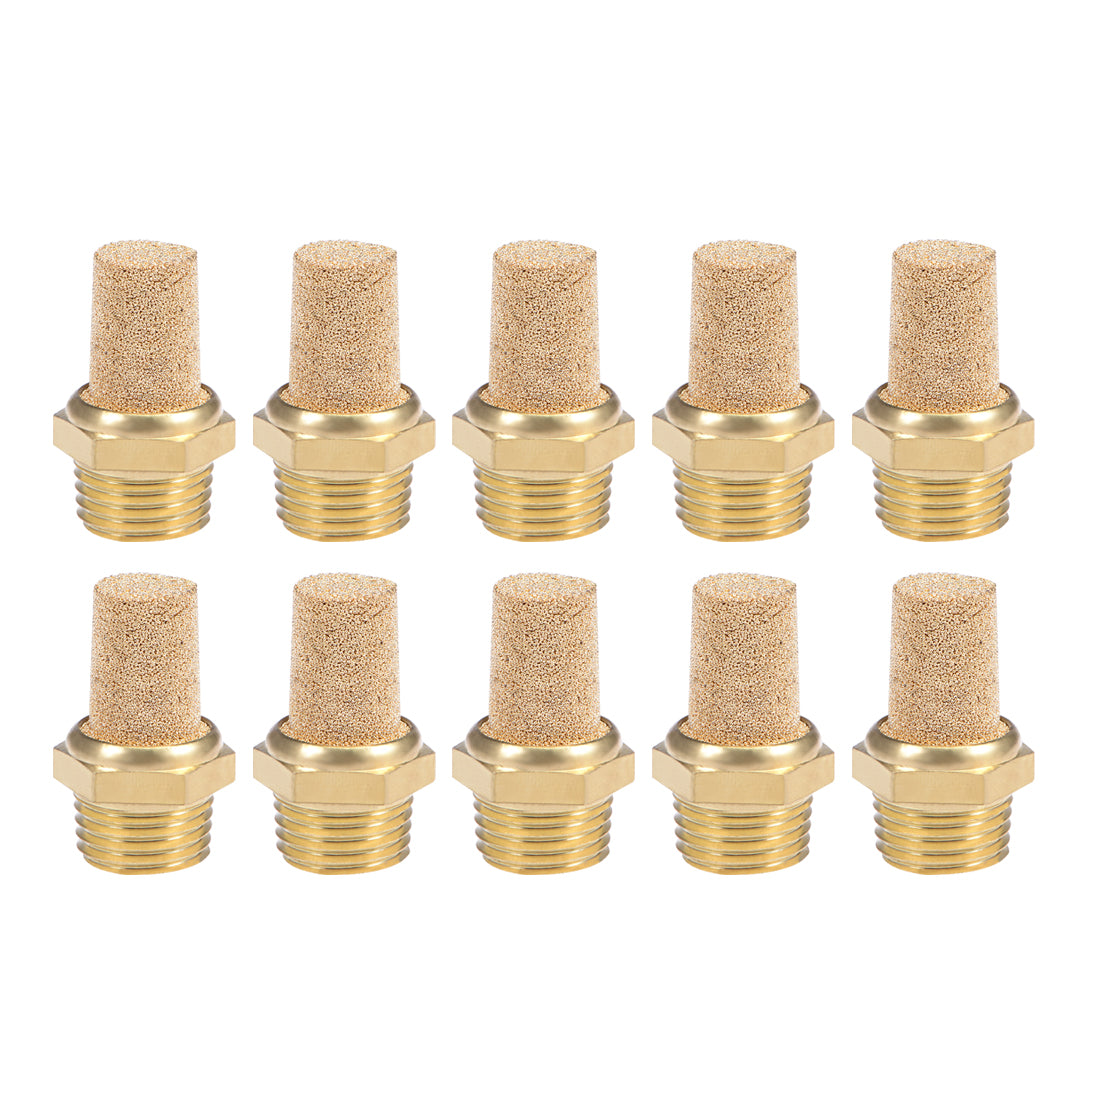 Uxcell Uxcell 1/8 PT Sintered Bronze Exhaust Muffler with Brass Body Protruding 10pcs